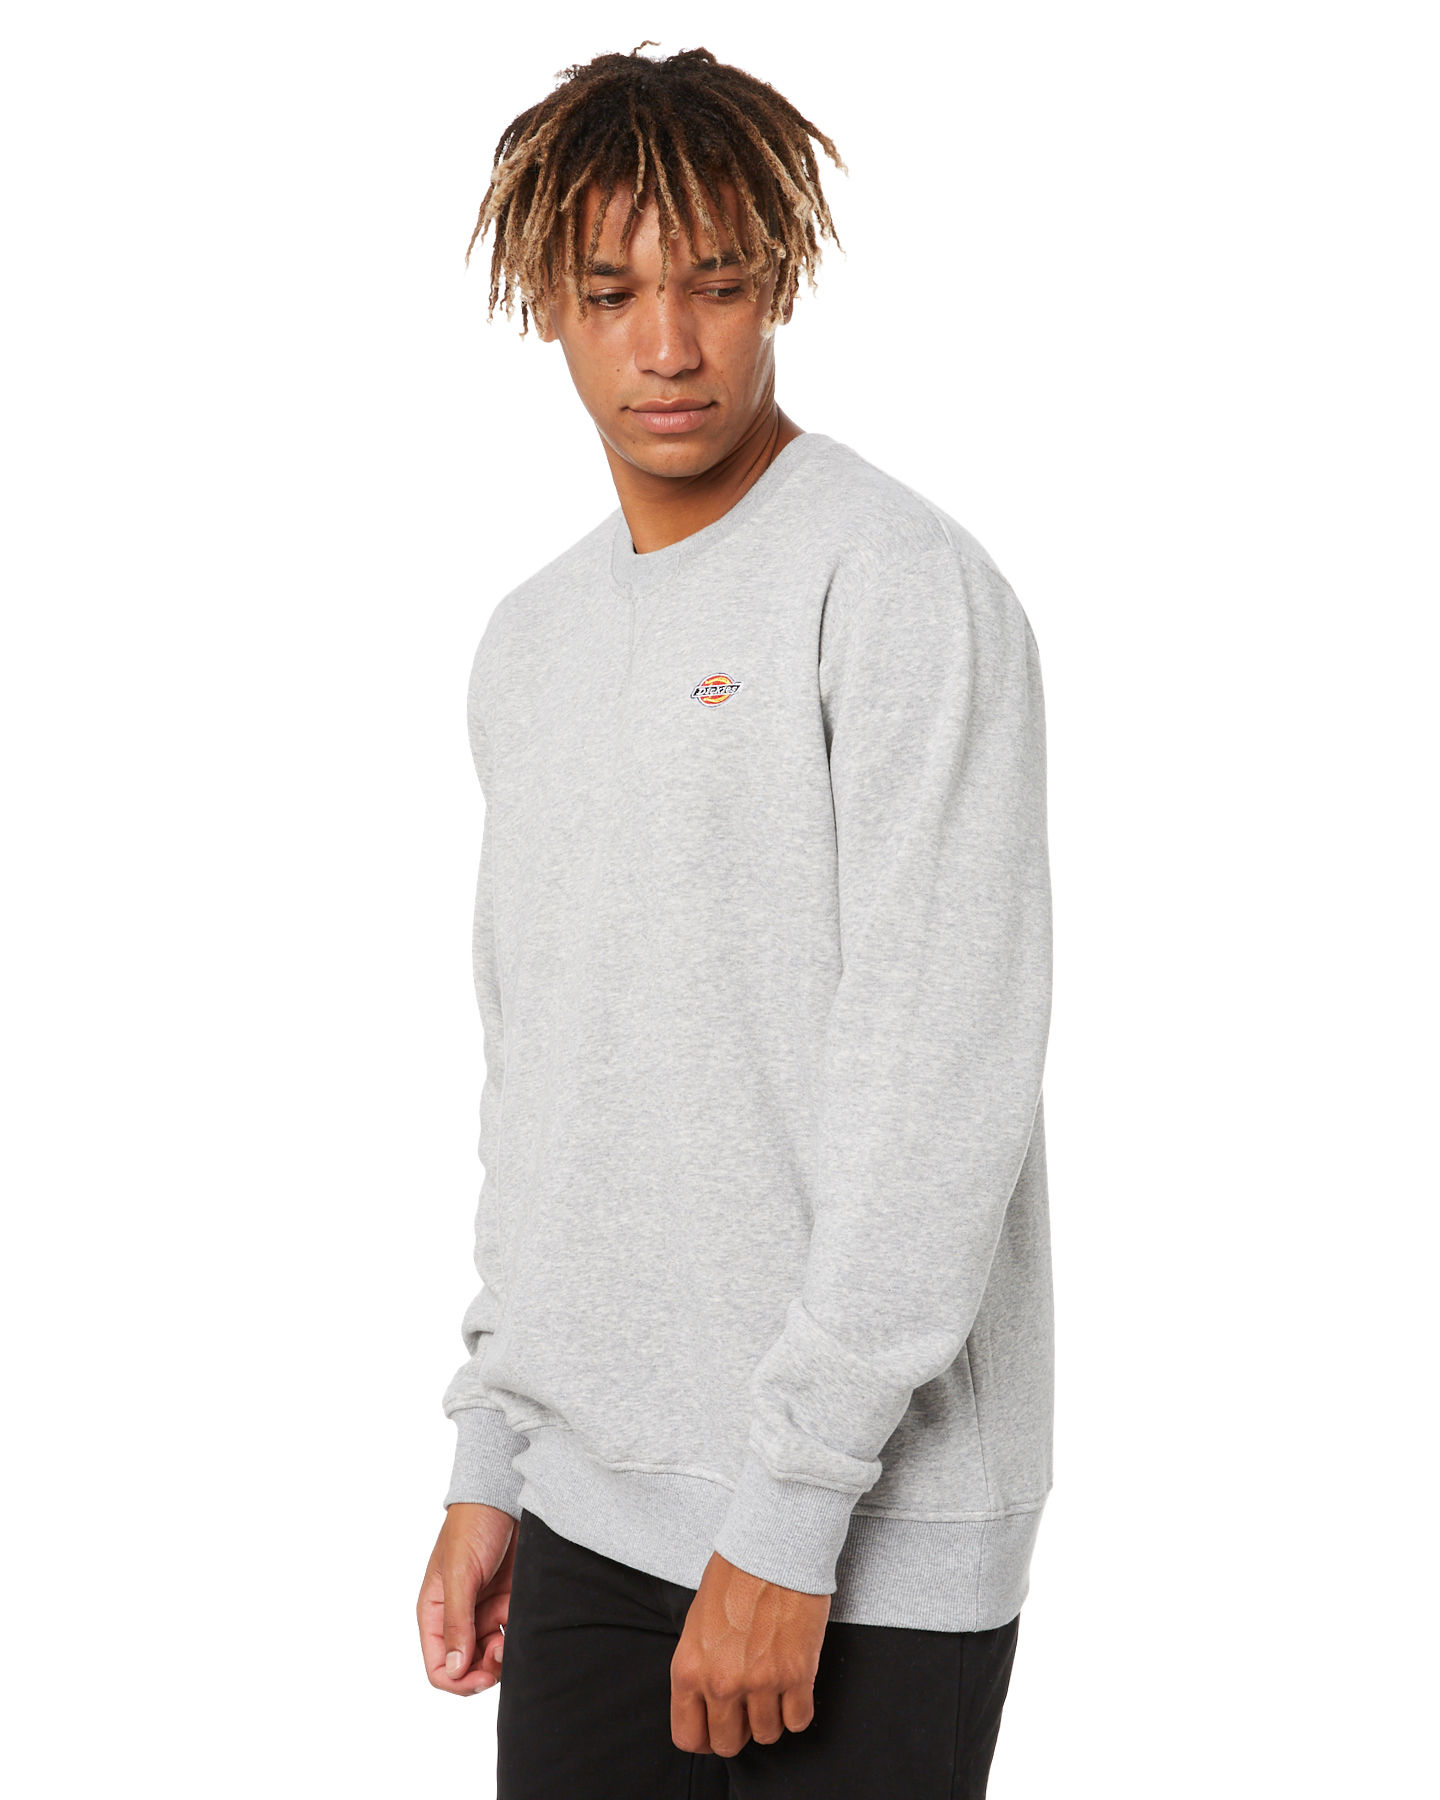 Dickies H.S Rockwood Mens Crew Neck Sweater - Grey Marle | SurfStitch